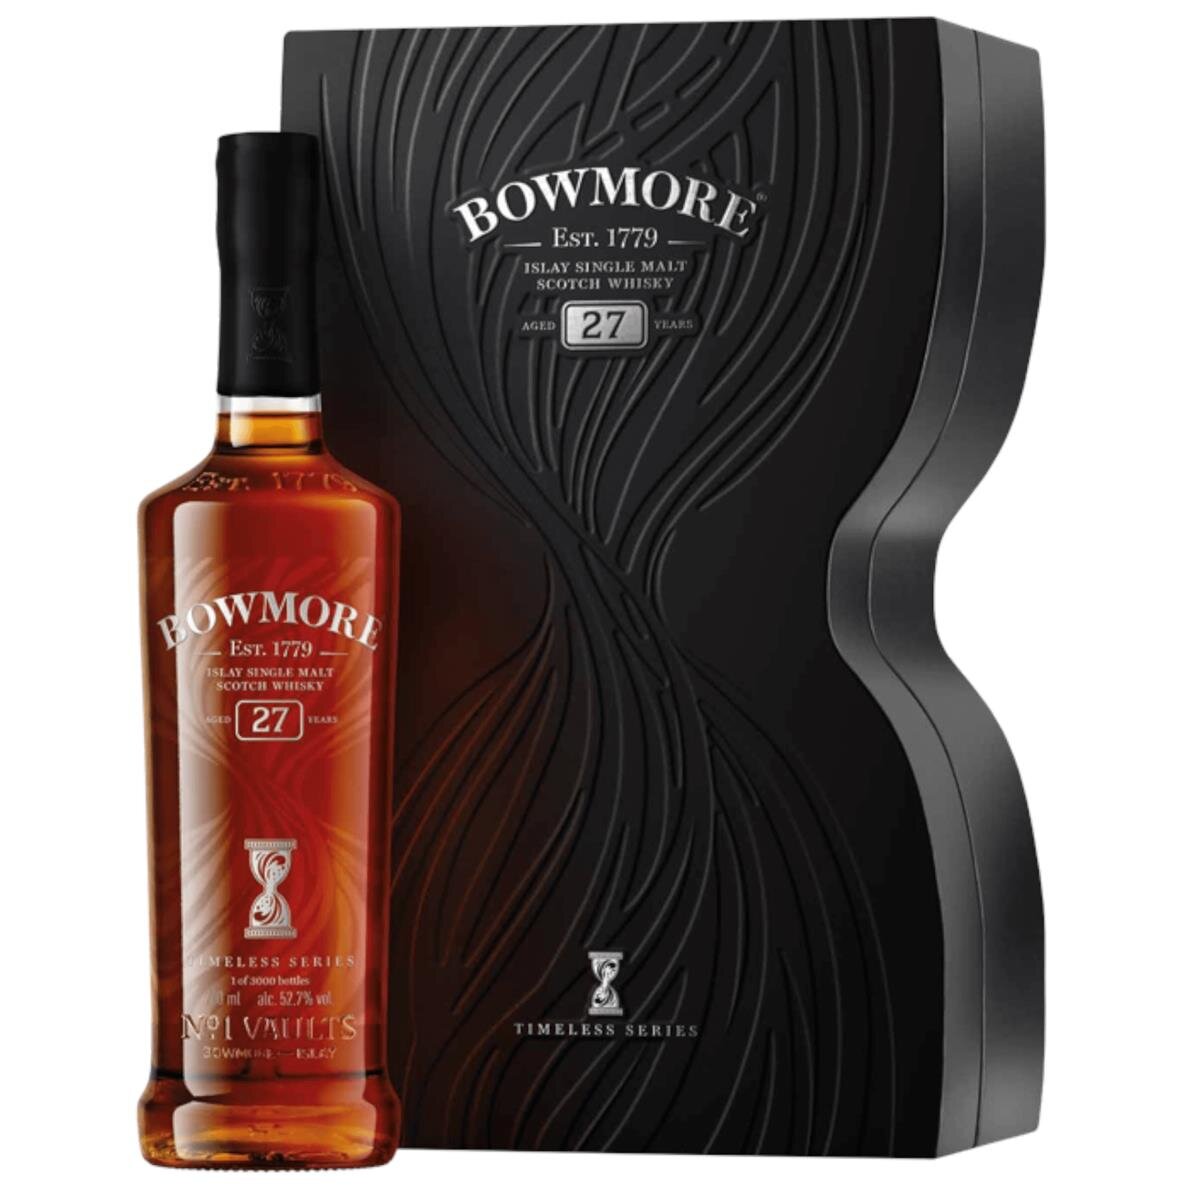 Bowmore 27 Years Series Timeless Vol. in 0,7l Geschenkbo Whisky 52,7